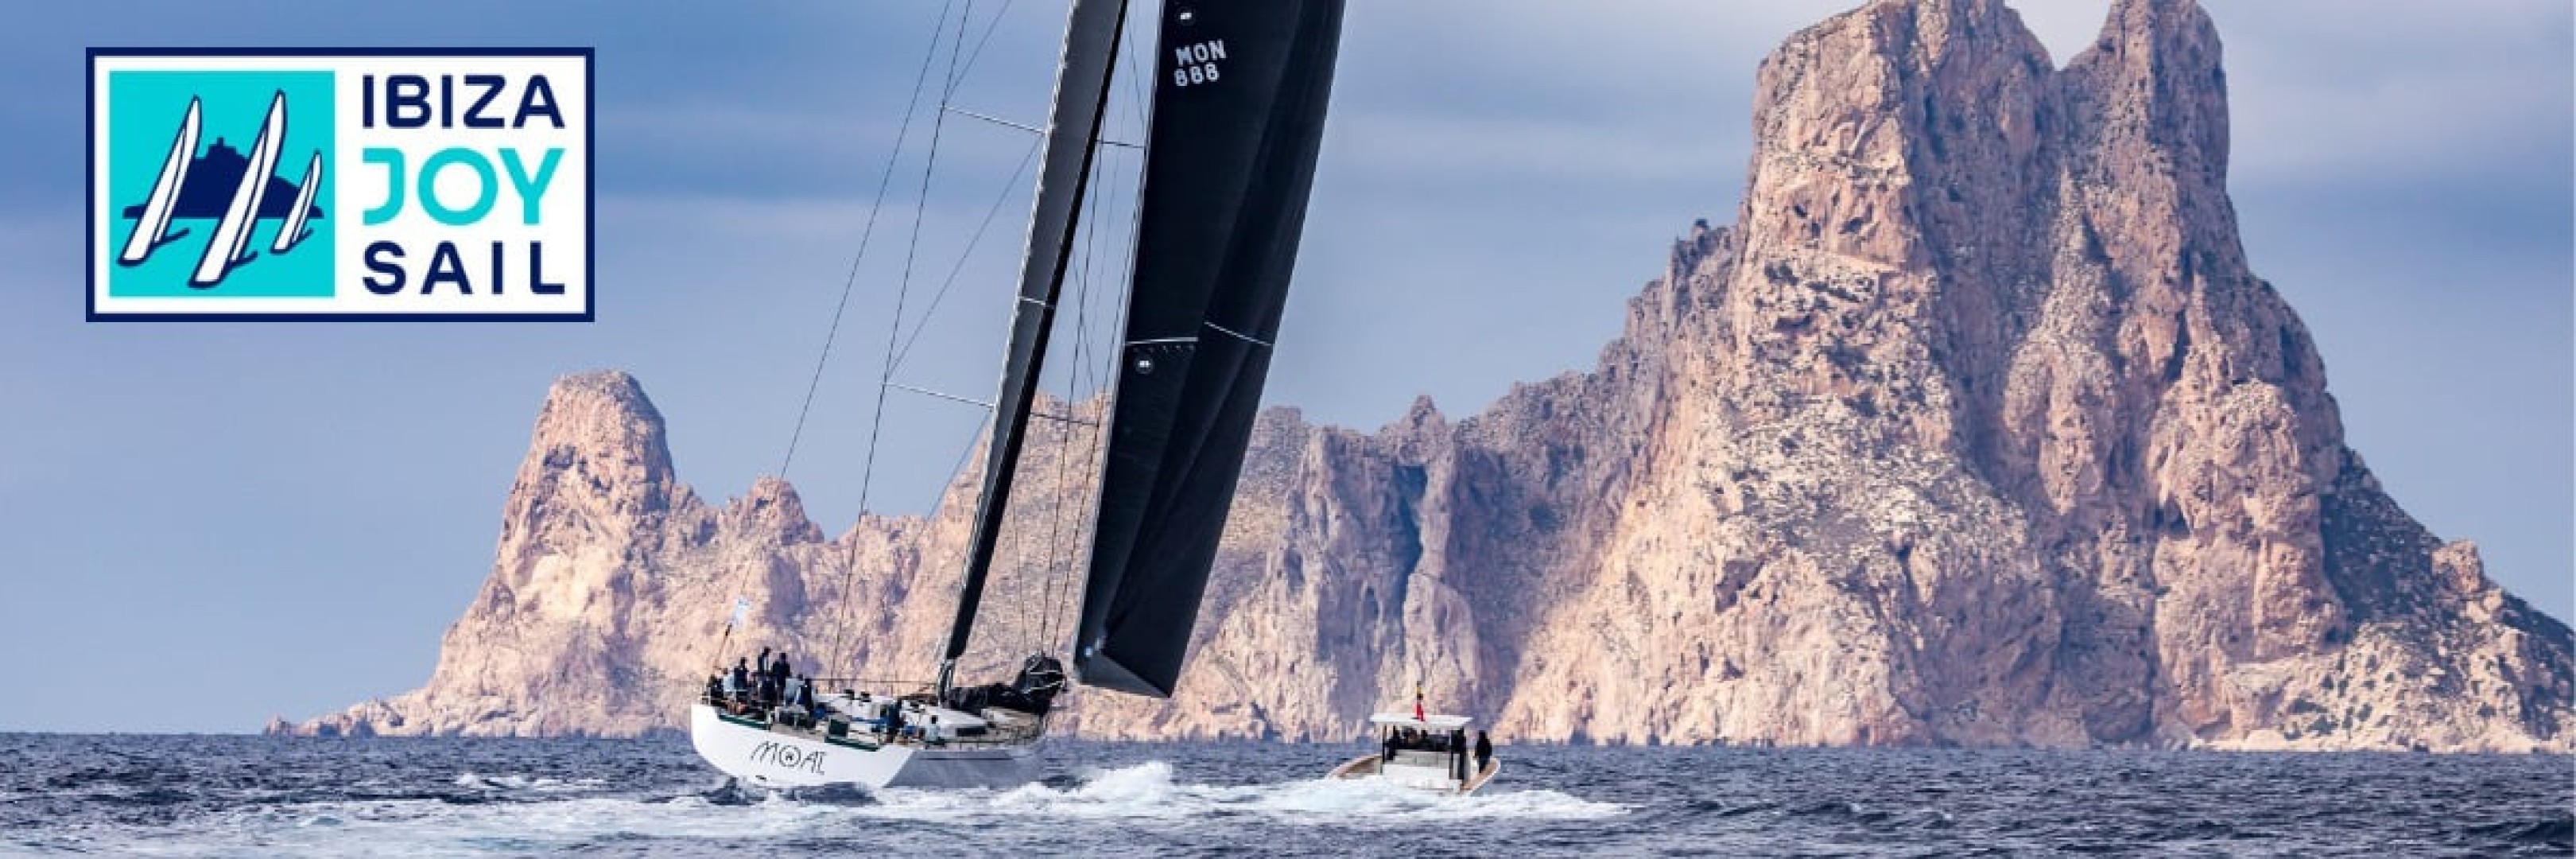 Ibiza JoySail ready to deliver a second helping of friendly racing